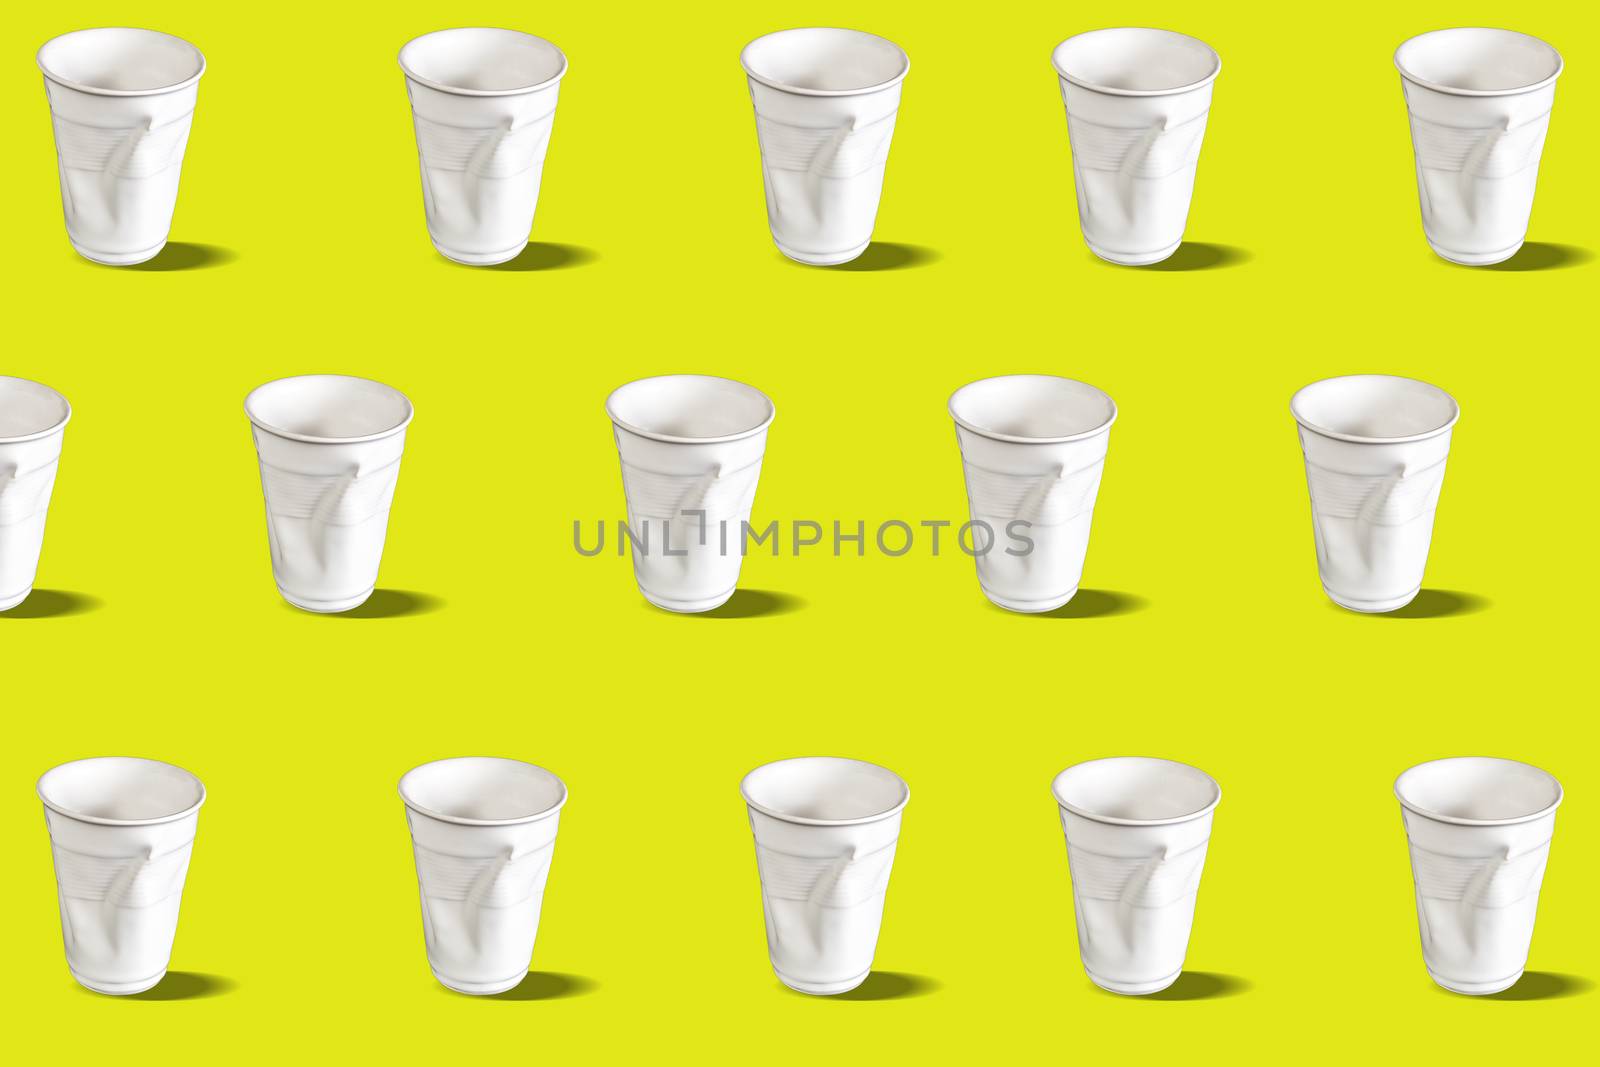 Disposable cups pattern. Disposable crumpled plastic water glasses. Pattern on a yellow background. Contemporary art. No 3D illustration